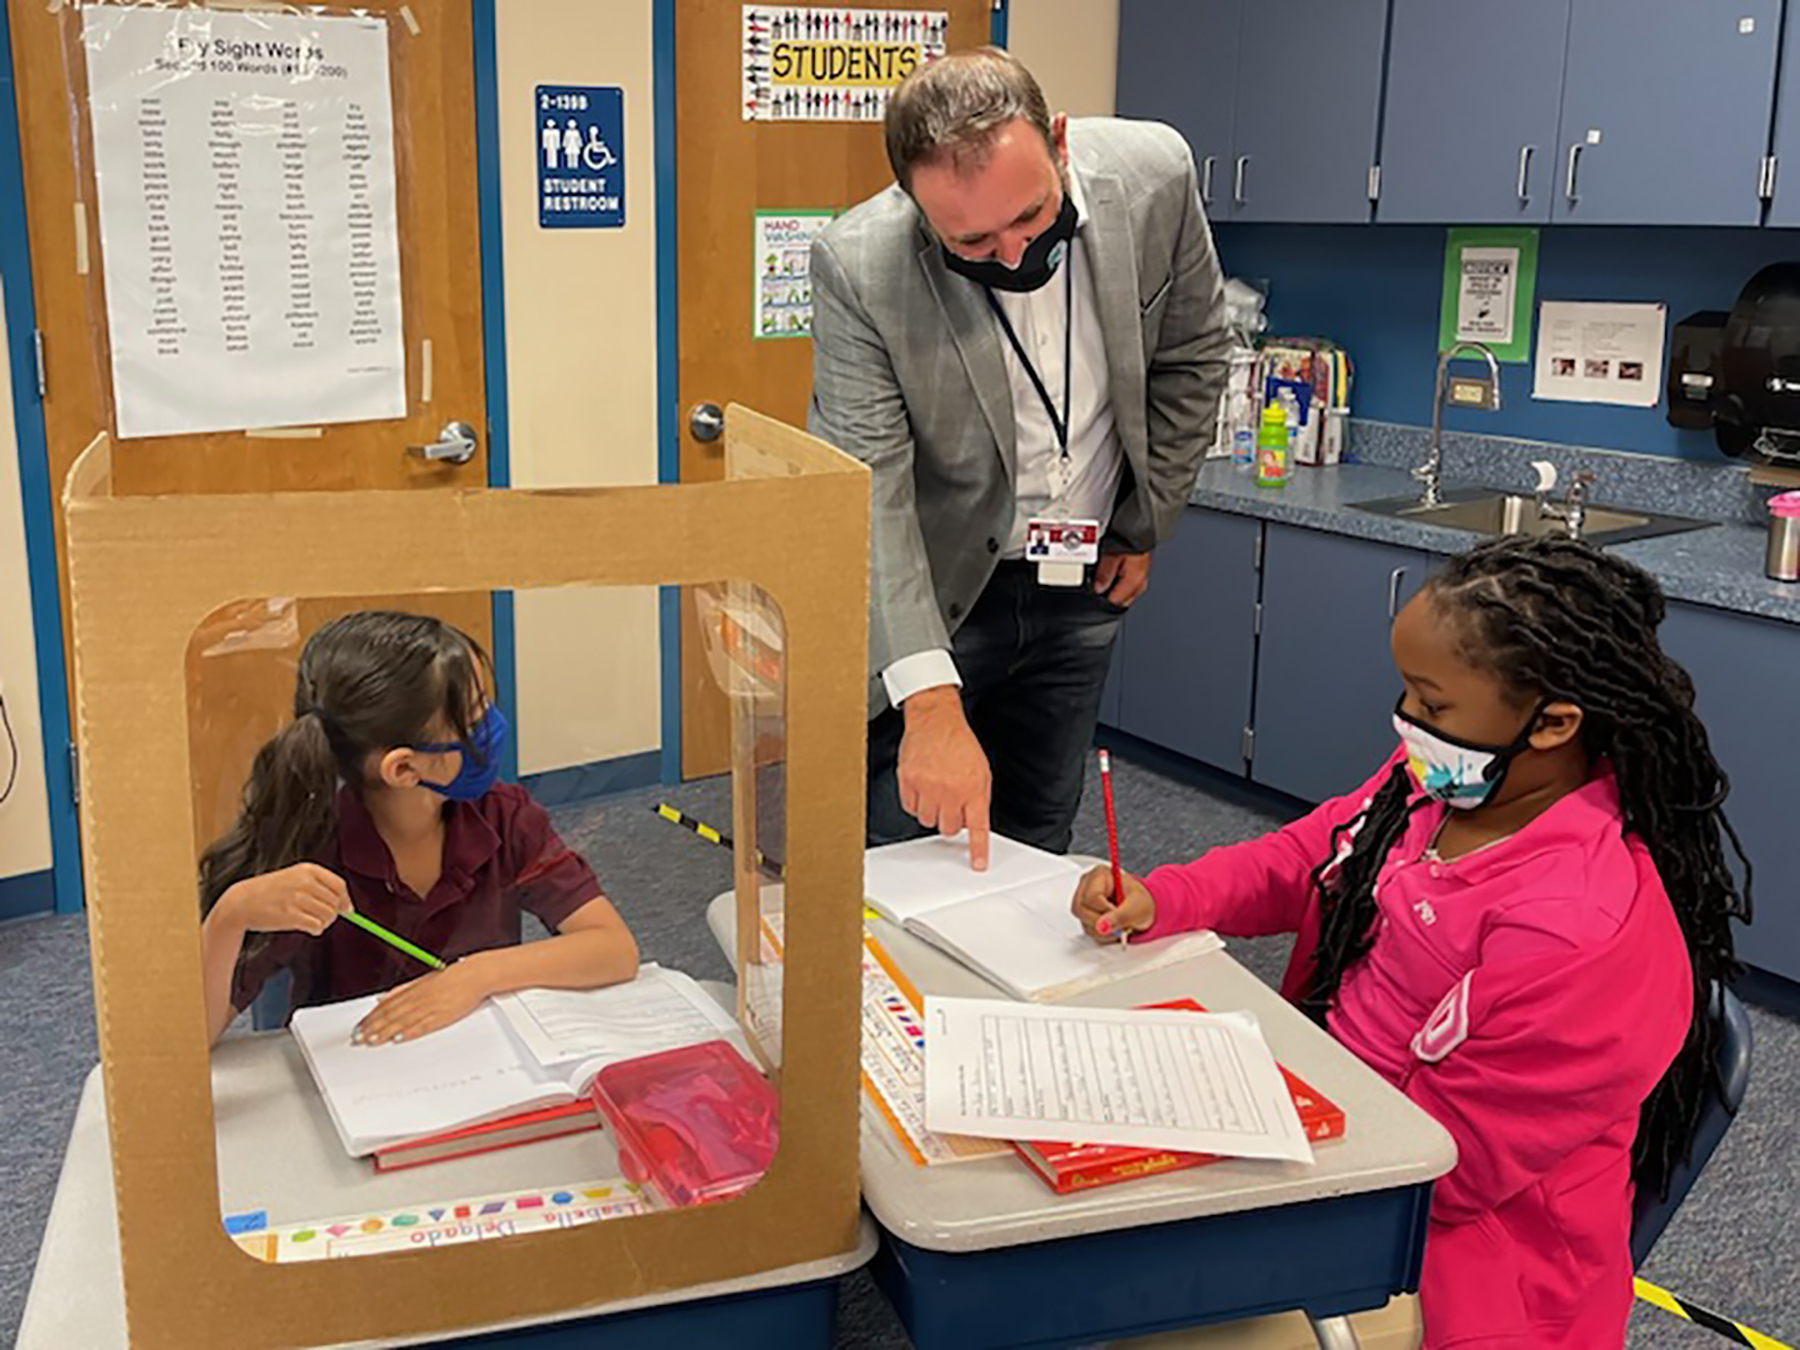 Palm View K-8 School Assistant Principal James Dougherty helps students with an assignment. Dougherty will be helping students at William H. Bashaw Elementary School next year as the new principal. Courtesy photo.